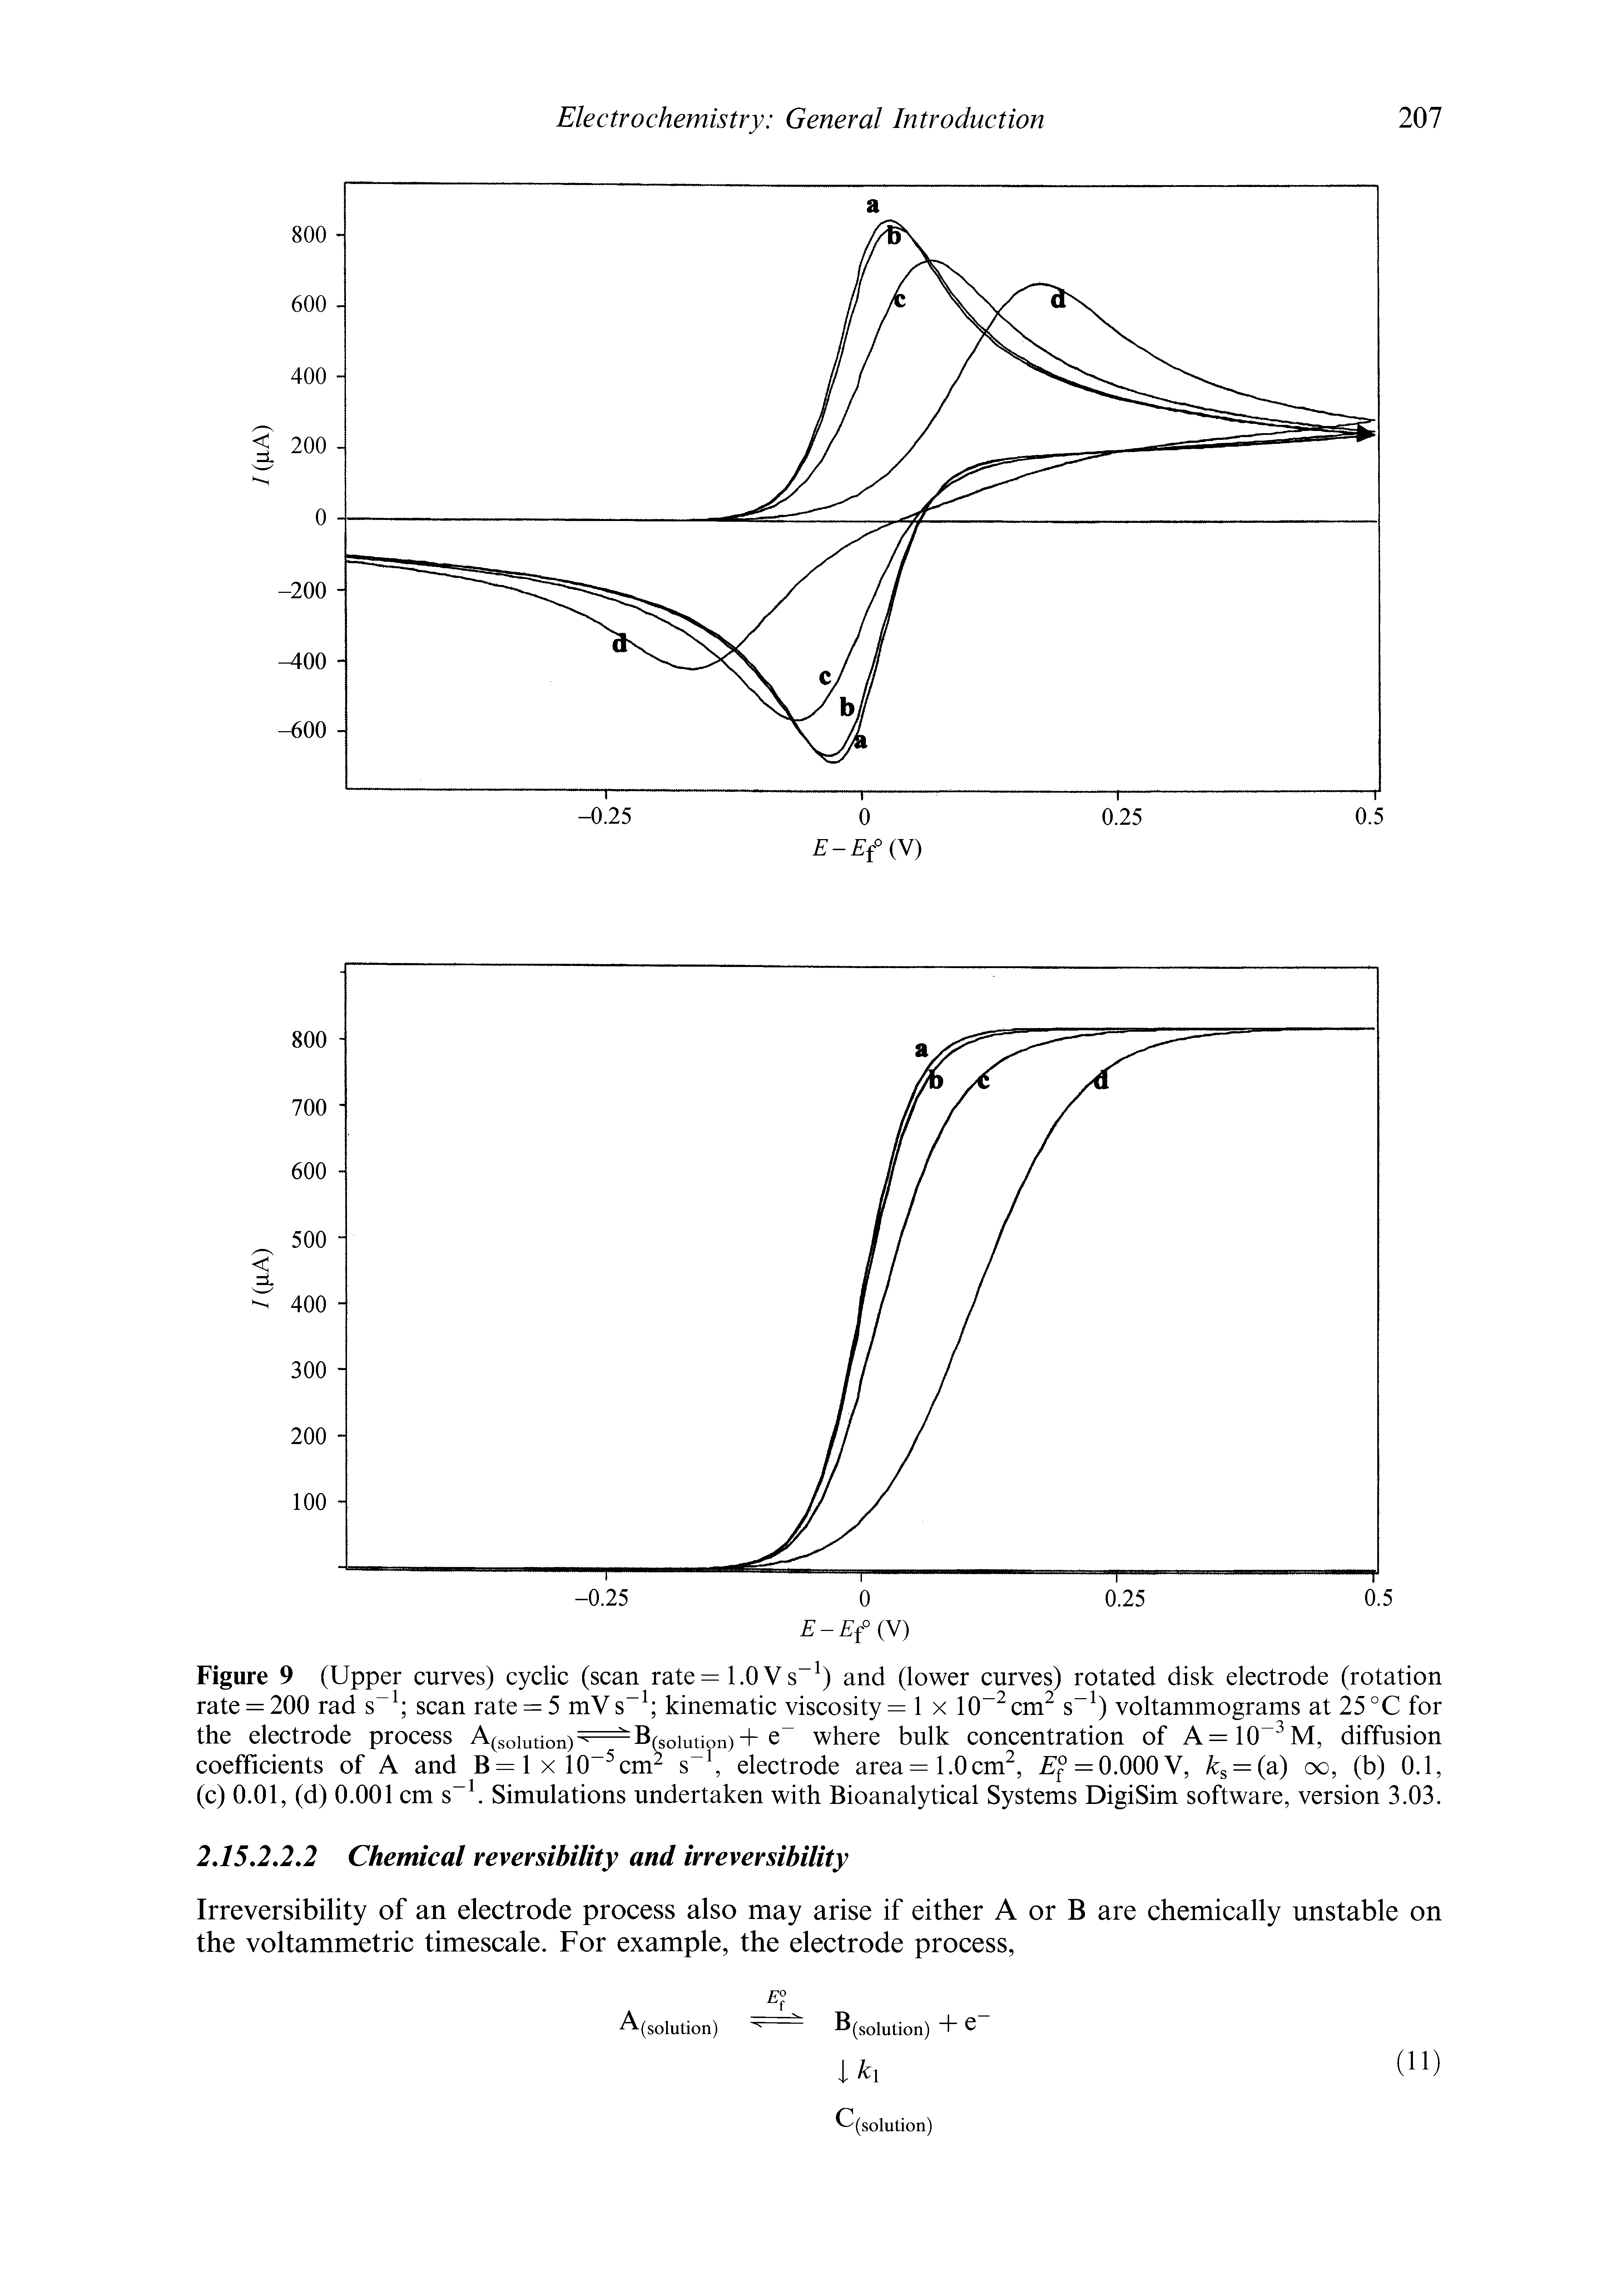 Figure 9 (Upper curves) cyclic (scan rate = 1.0 V s and (lower curves) rotated disk electrode (rotation rate = 200 rad s scan rate = 5 mVs kinematic viscosity = 1 x 10 cm s ) voltammograms at 25 °C for...